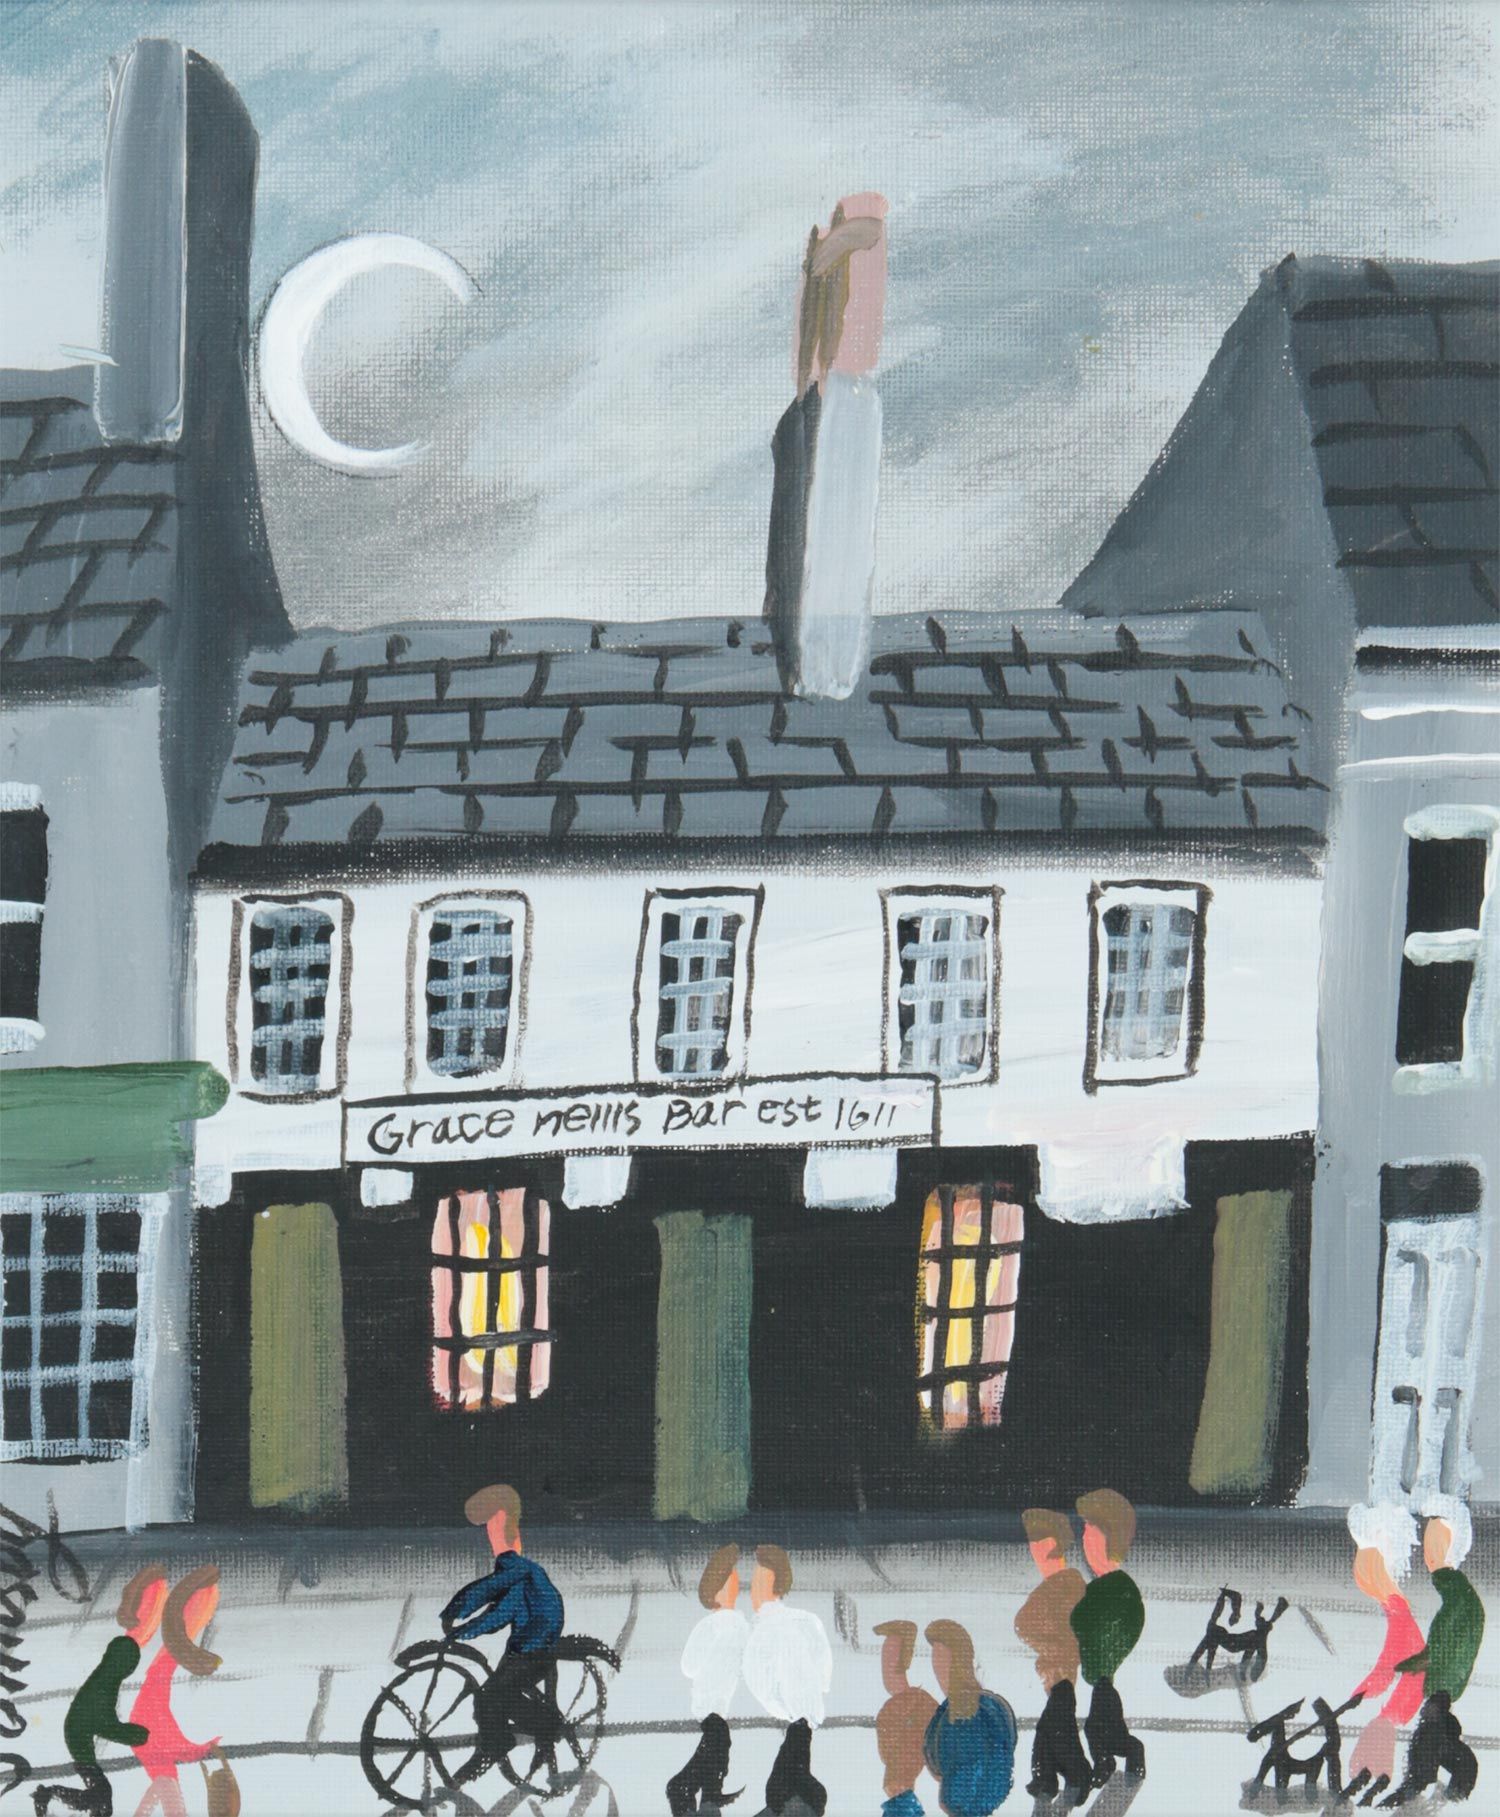 GRACE NEILL'S BAR IN DONAGHADEE by John Ormsby